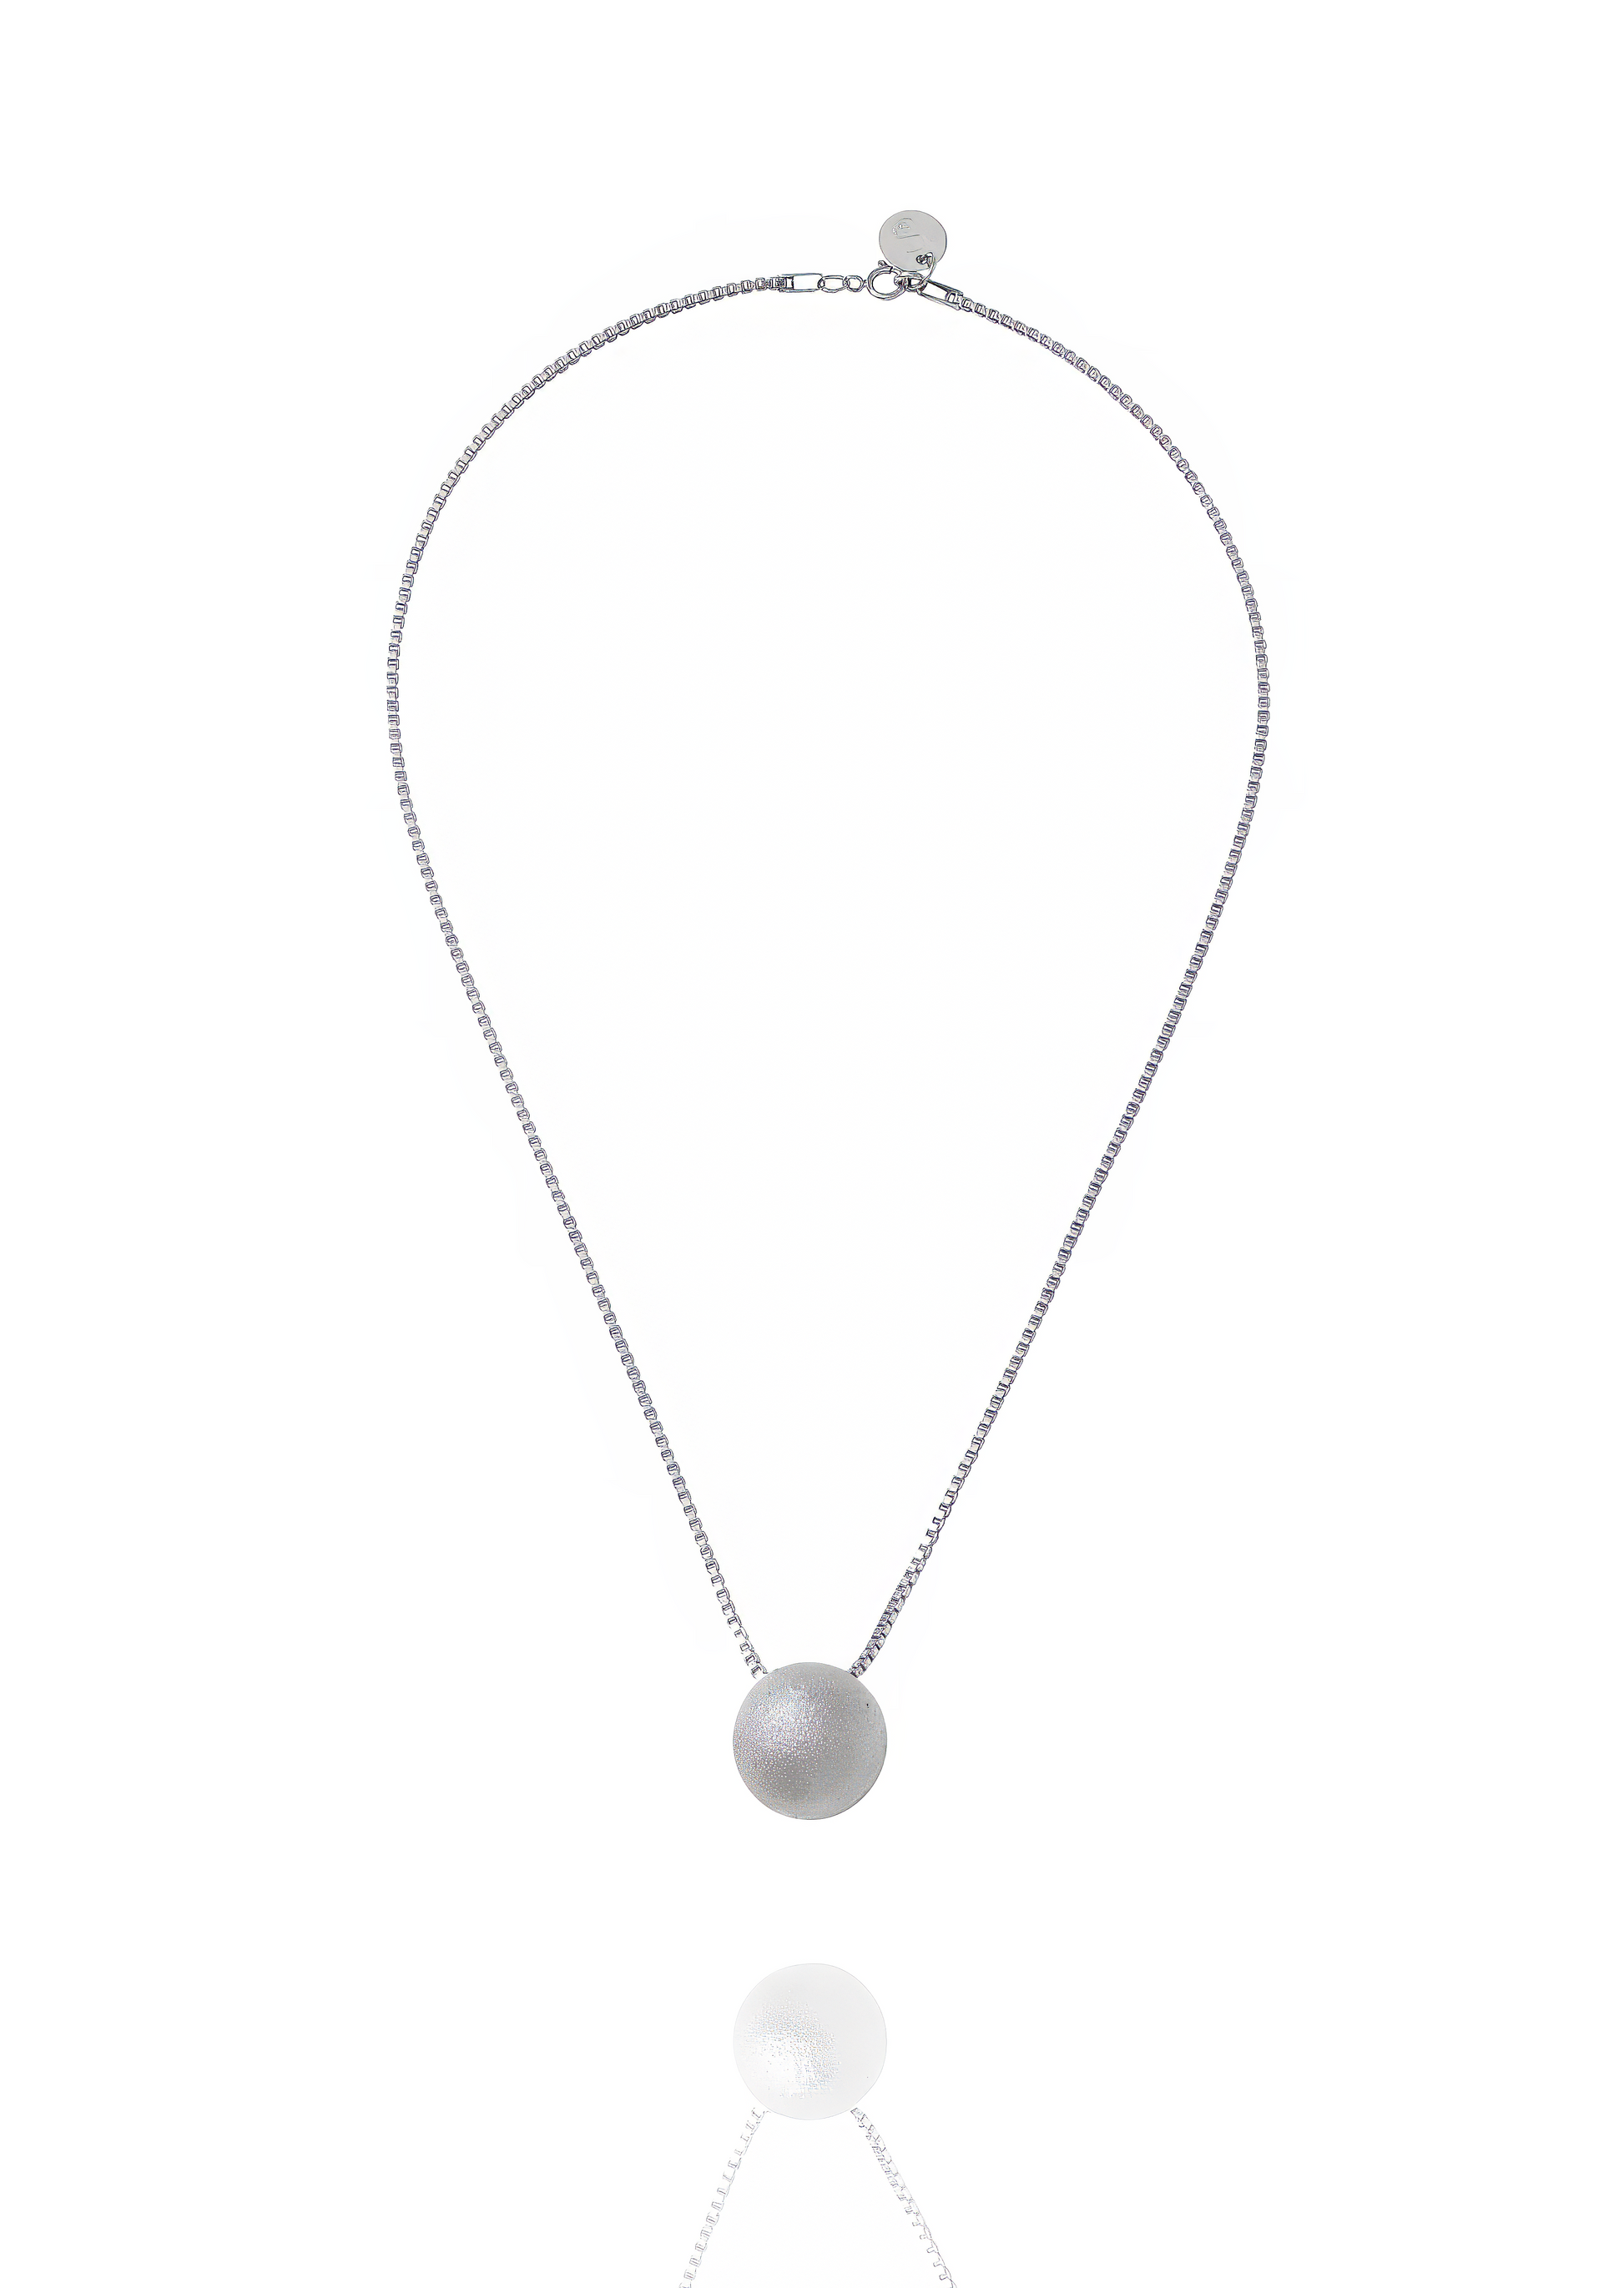 Nickel Alloy Soul Sphere Necklace white background